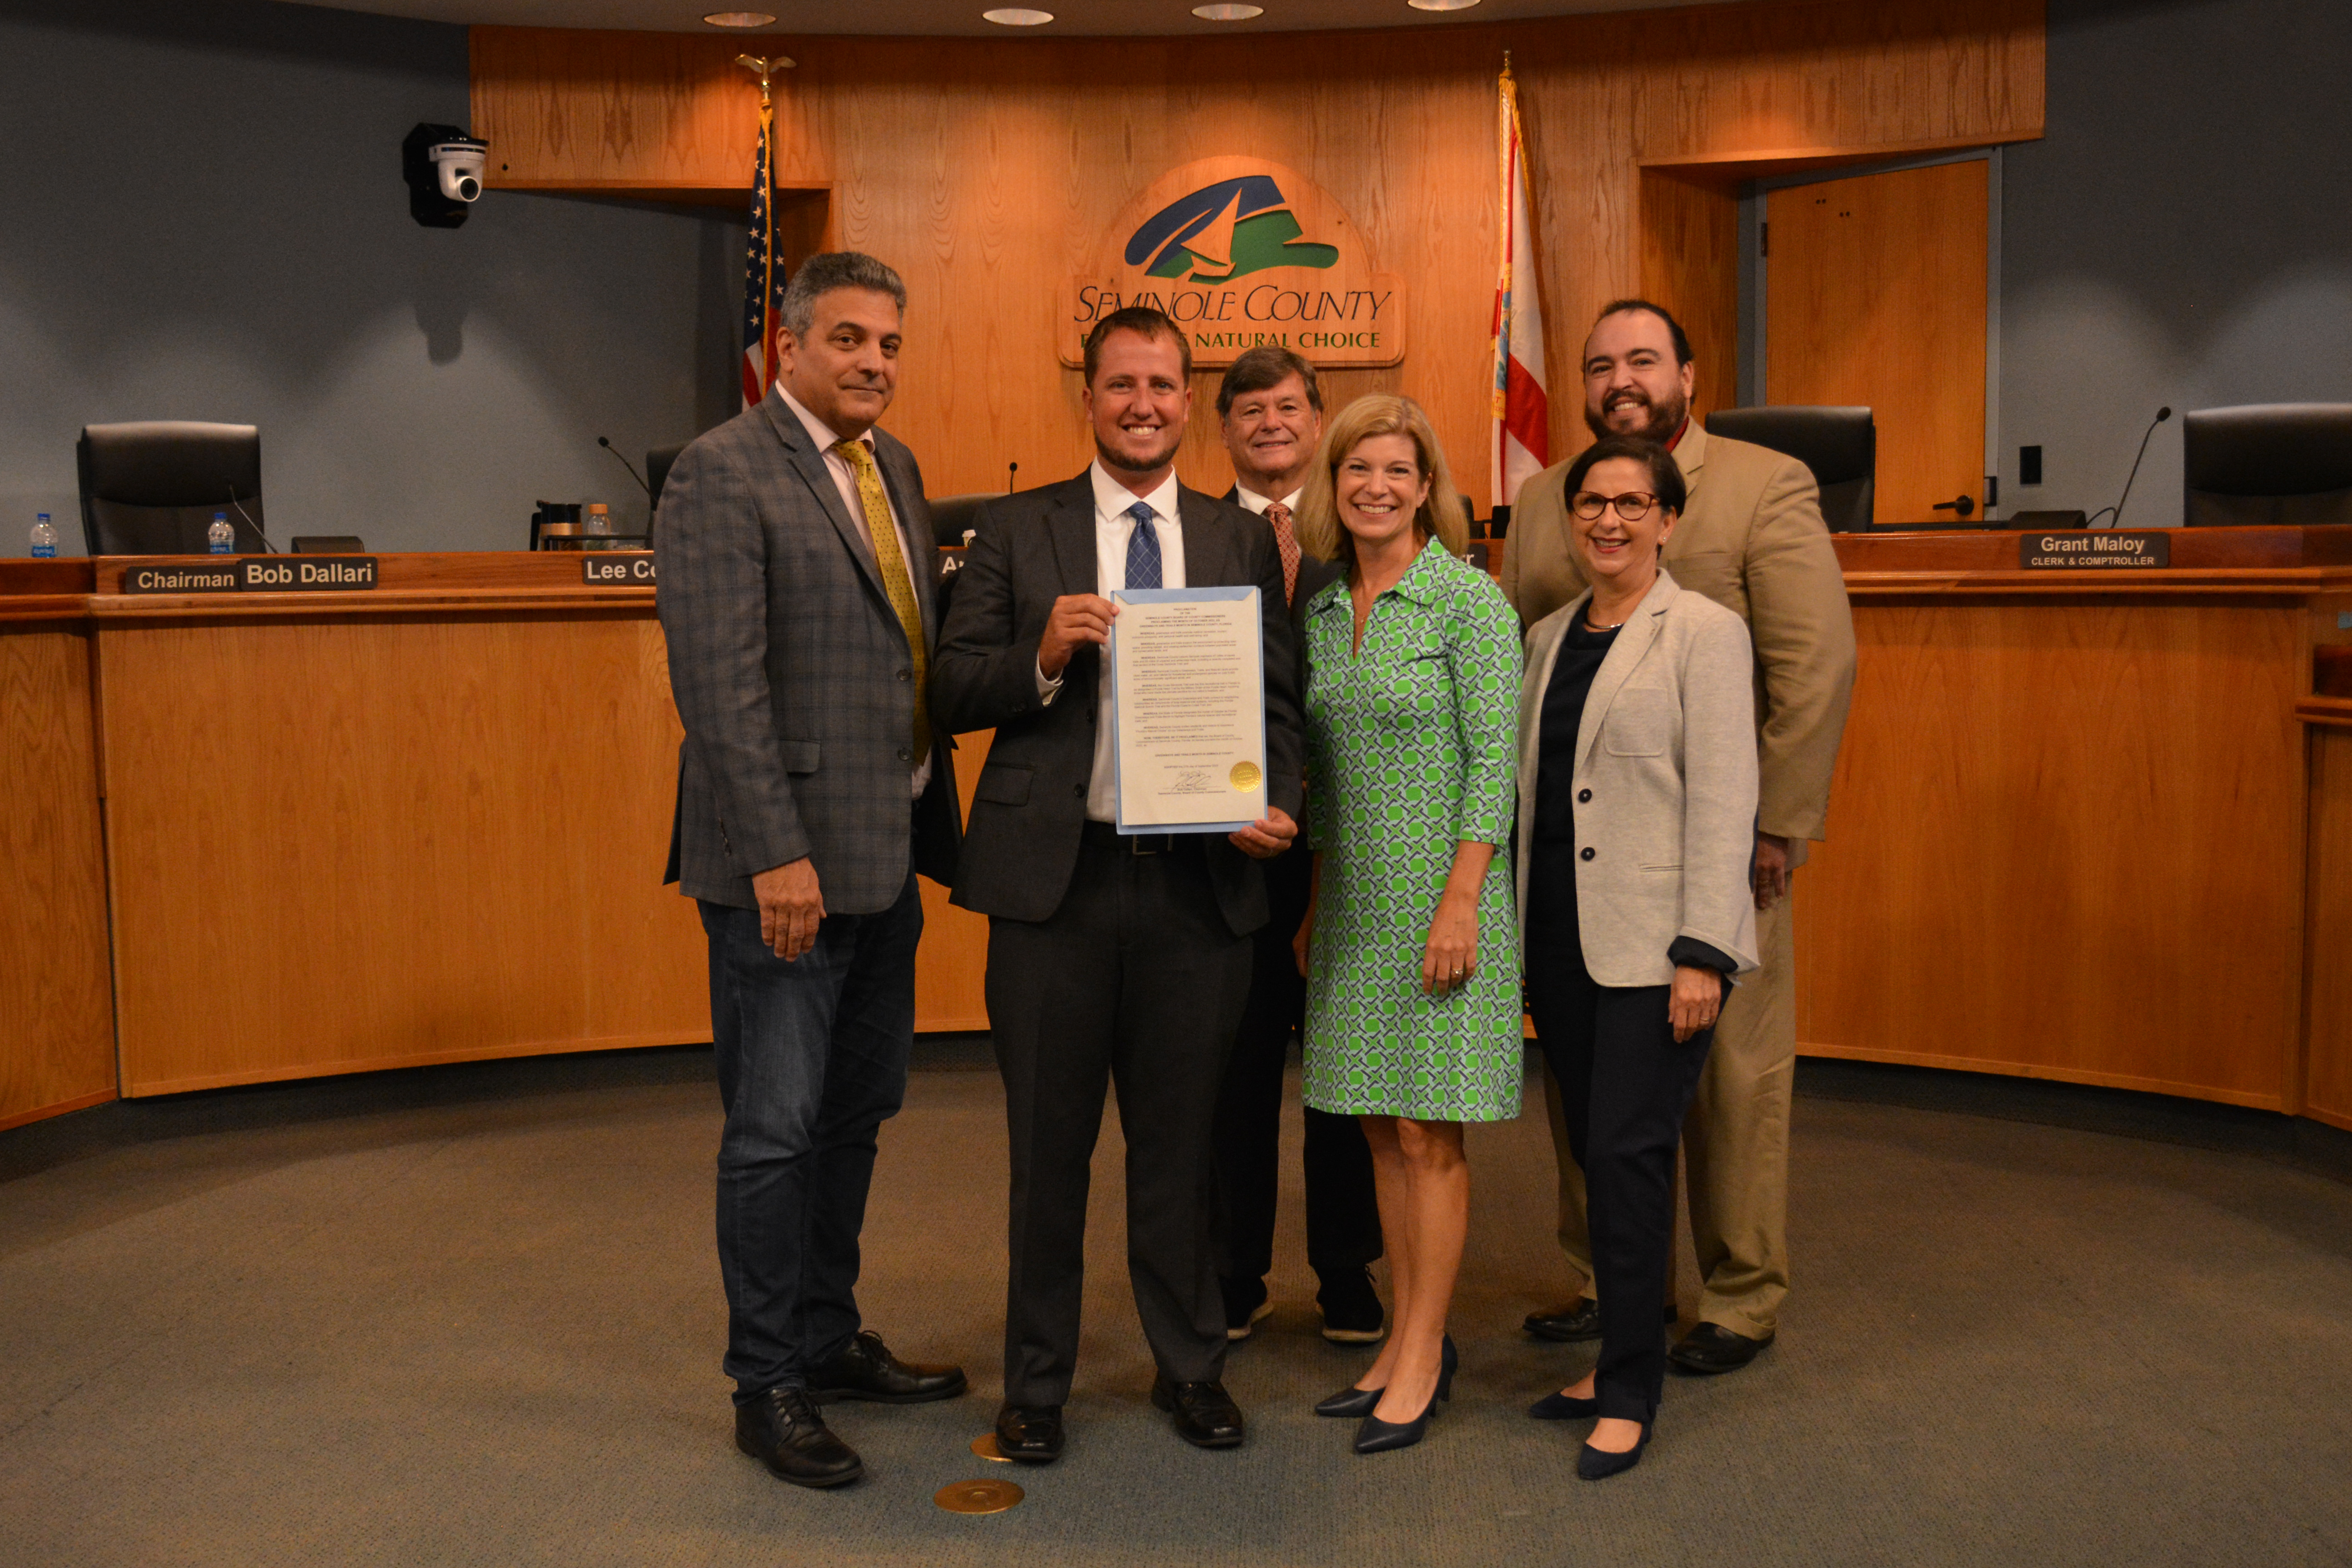 Proclamation Proclaiming October as Greenways and Trails Month in Seminole County